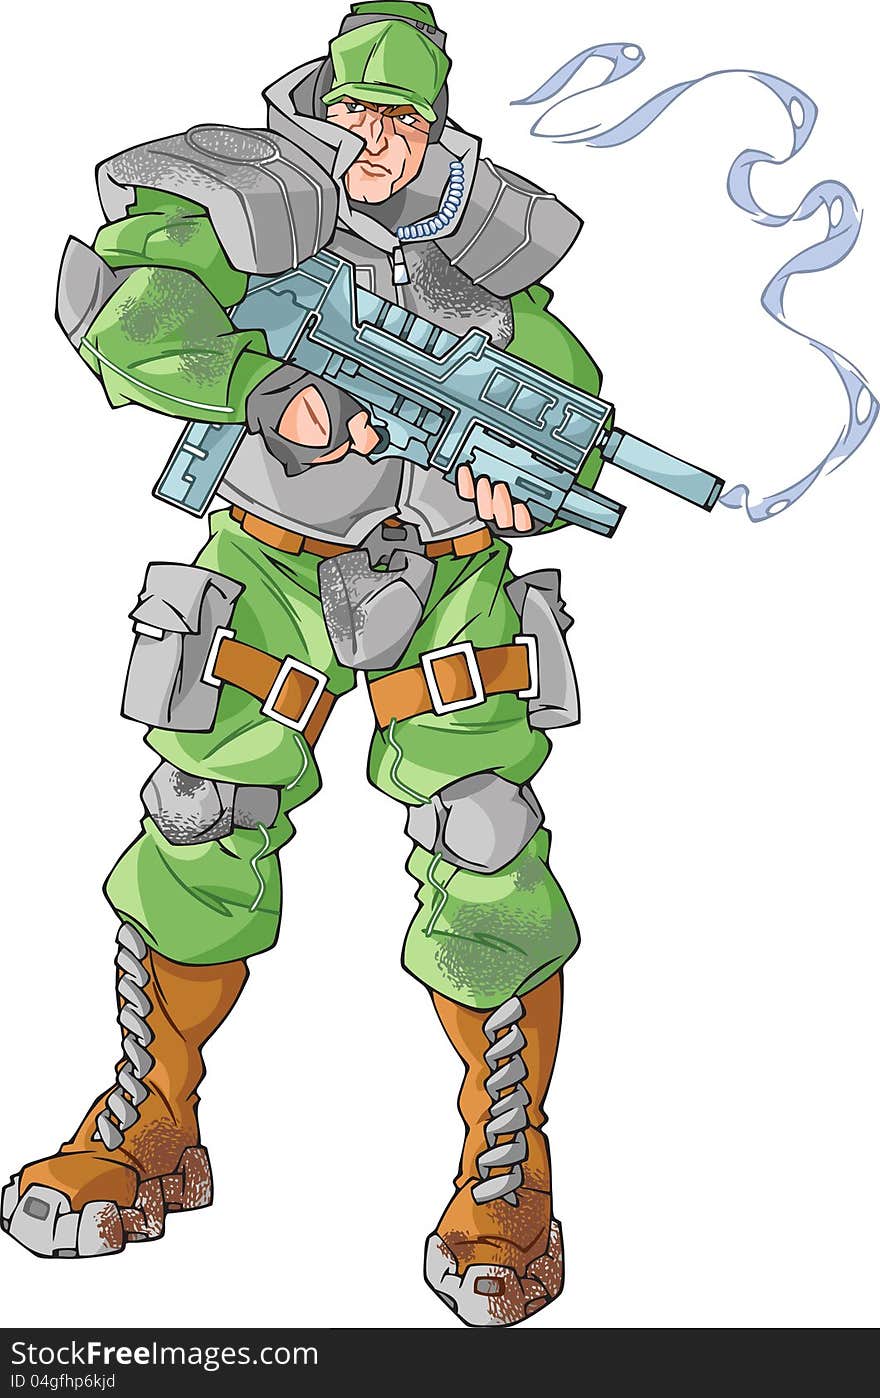 The illustration shows marine soldier. The soldier is standing with futuristic smoking gun in his arms. The illustration done in comic book style.